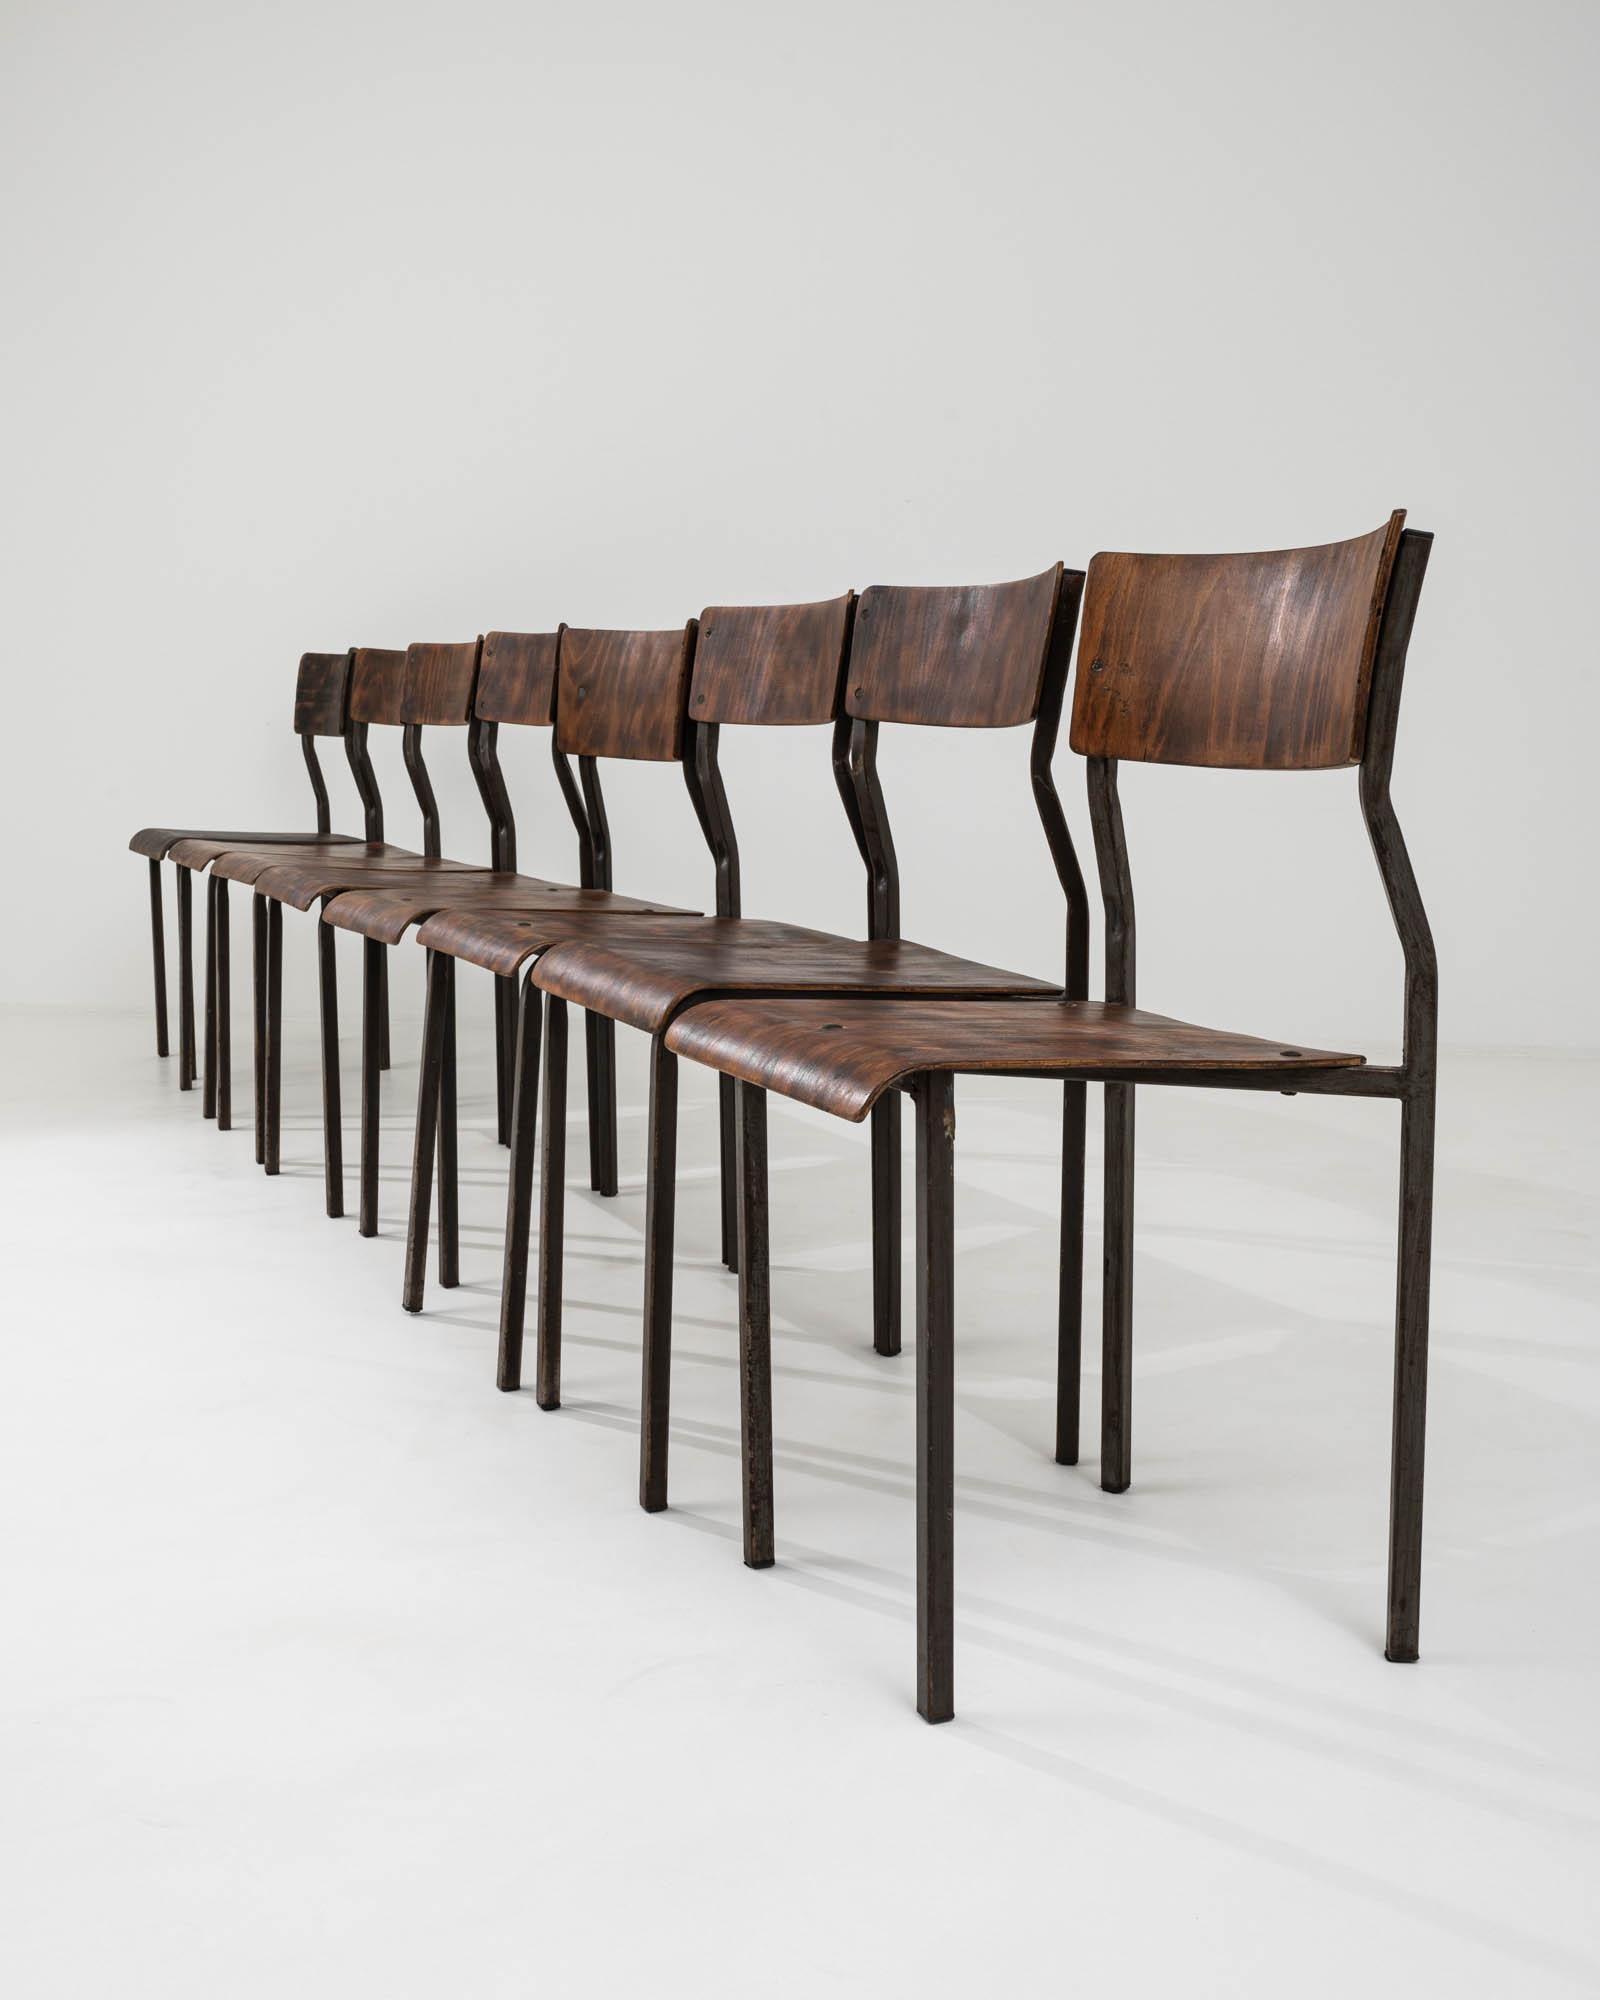 20th Century Central European Metal & Wooden Dining Chairs, Set of 4 For Sale 9